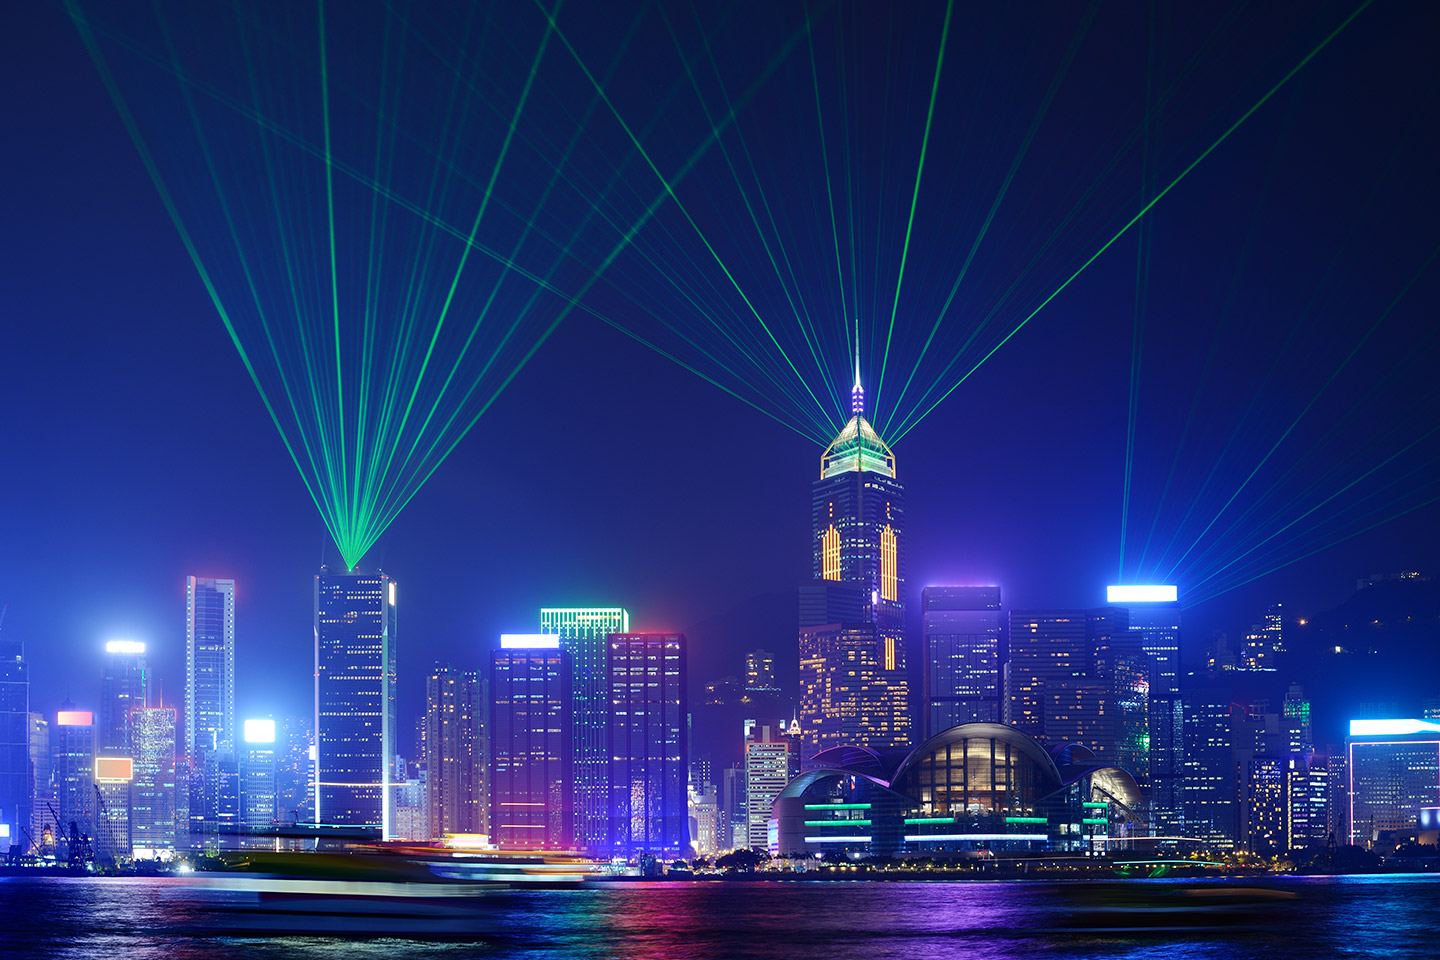 Hong Kong by Night Tour, dinner cruise and “Symphony of Lights” show